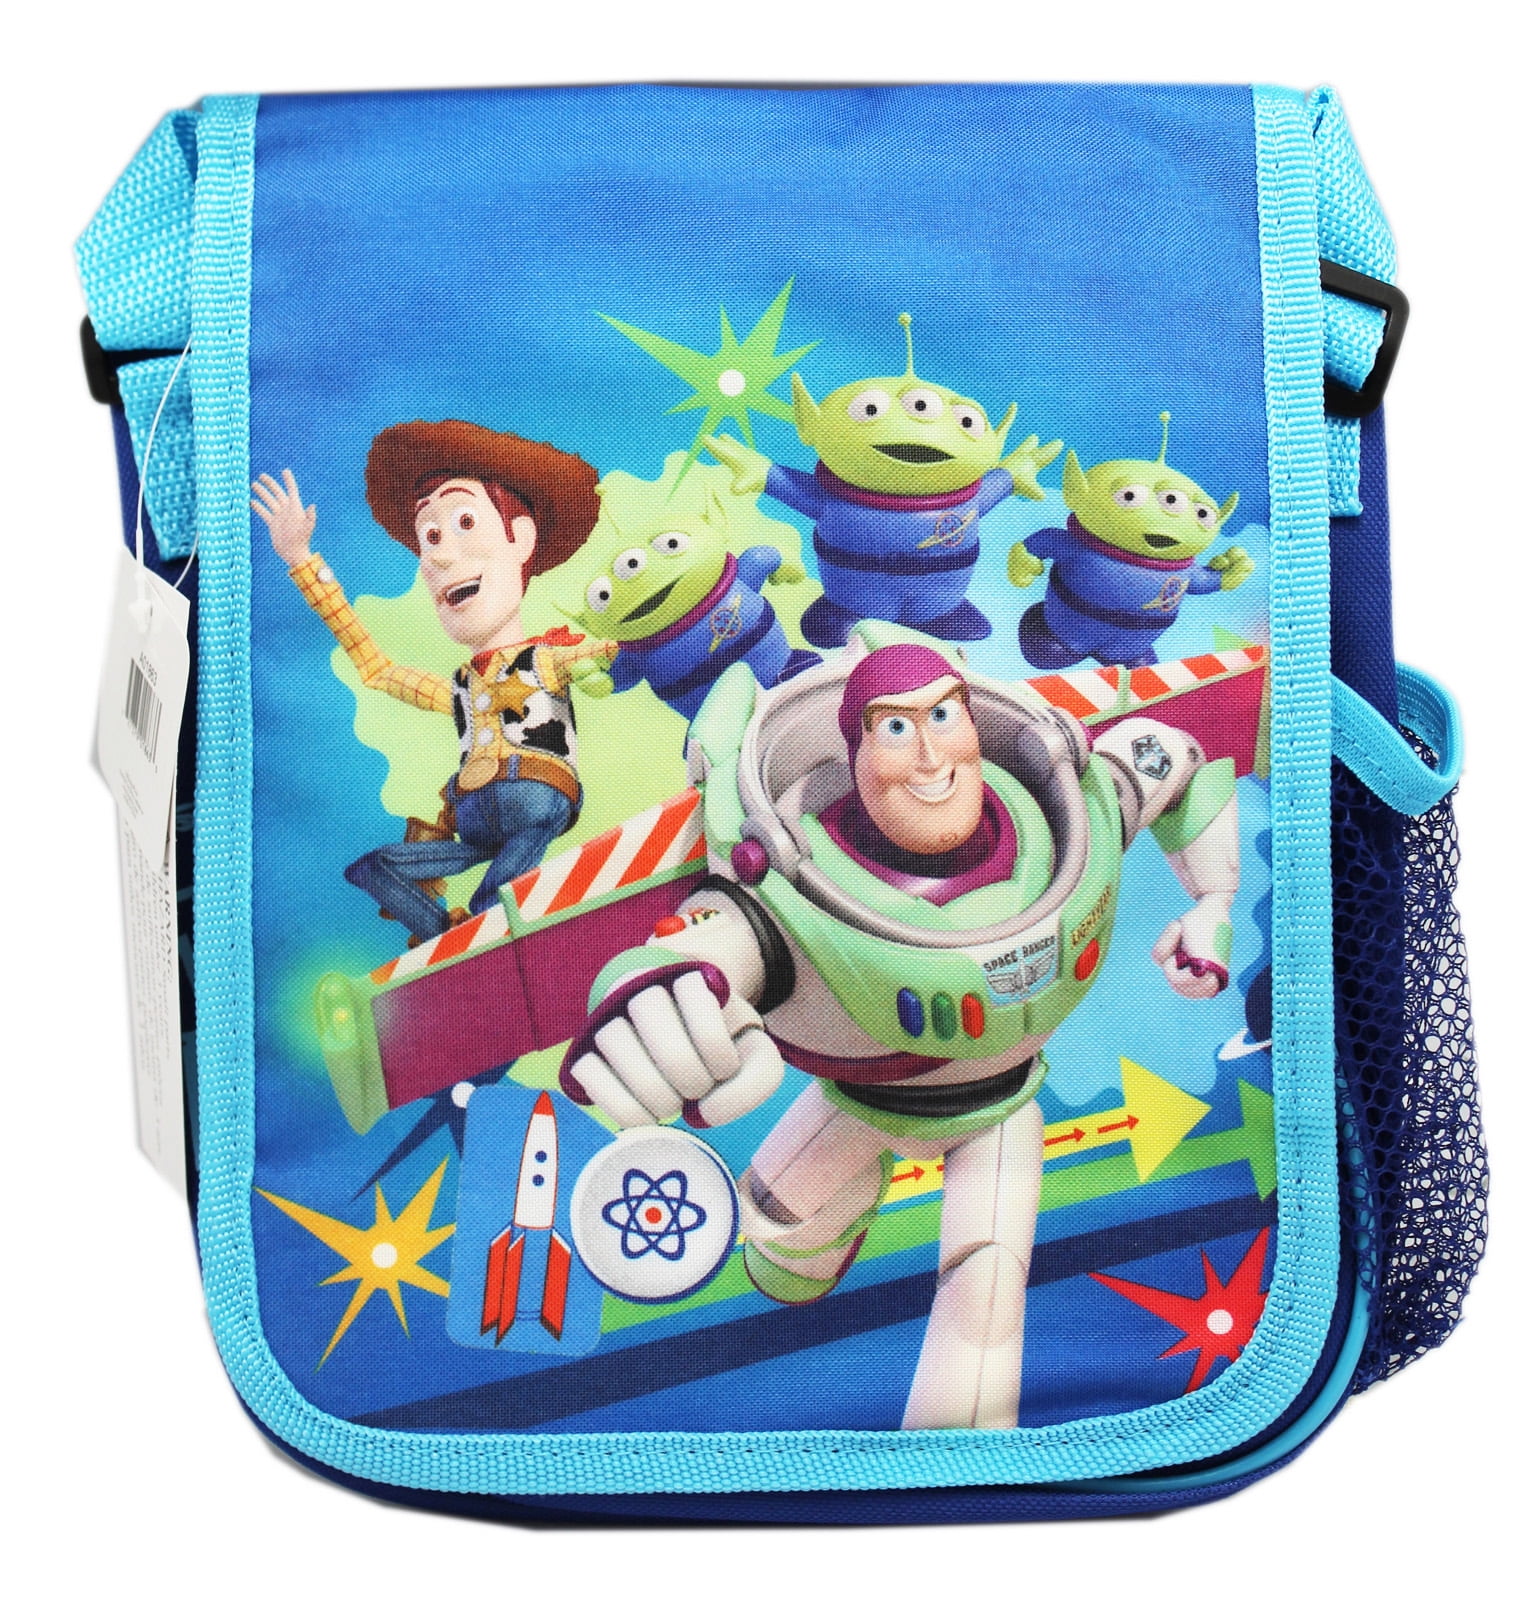 PRIMARK Disney Mini Storage Bag Tote Lunch Bag Mickey Mouse OR Toy story 4 Woody 